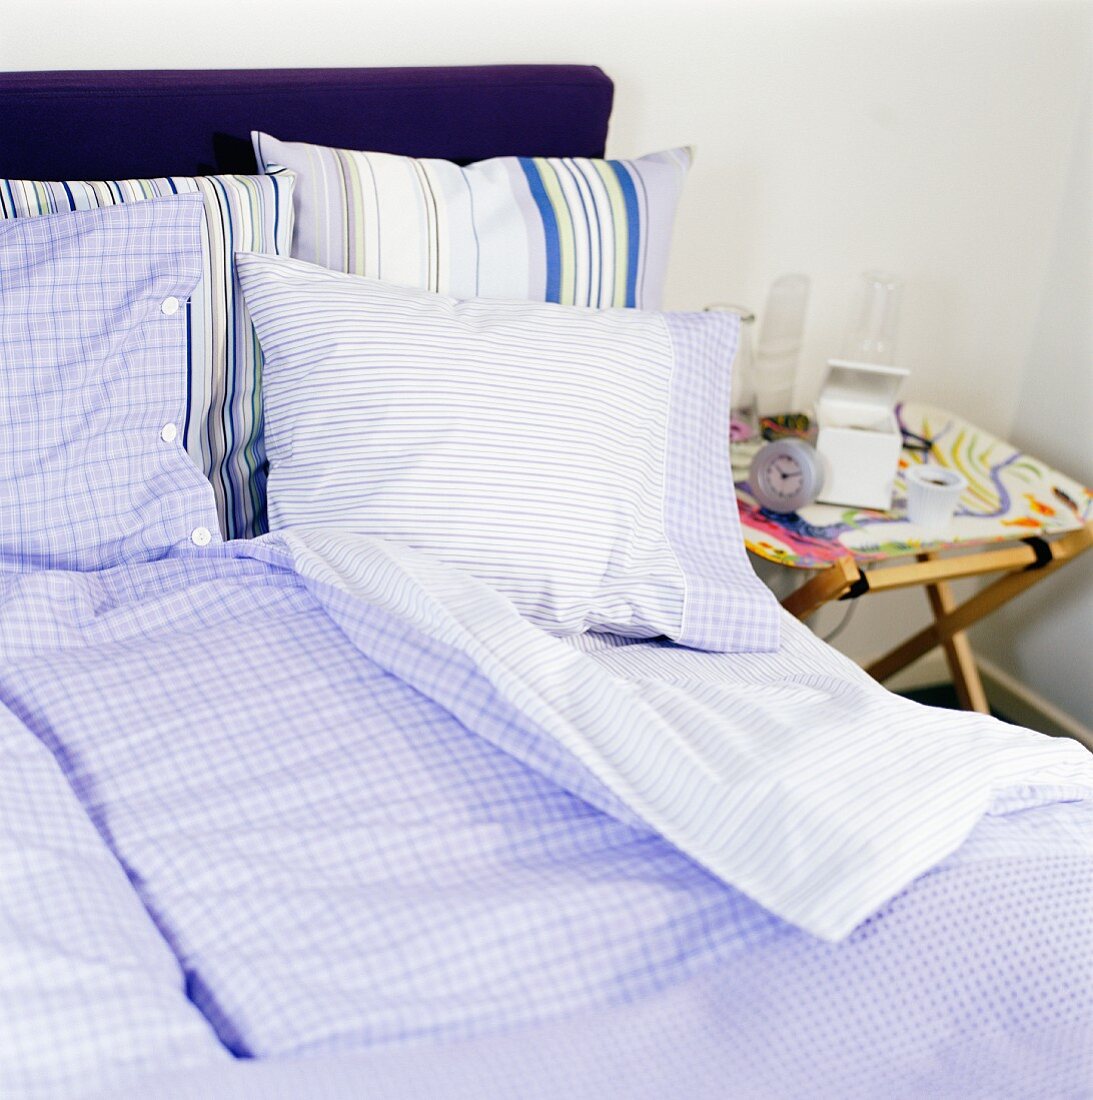 Bed with blue and white patterned bed linen